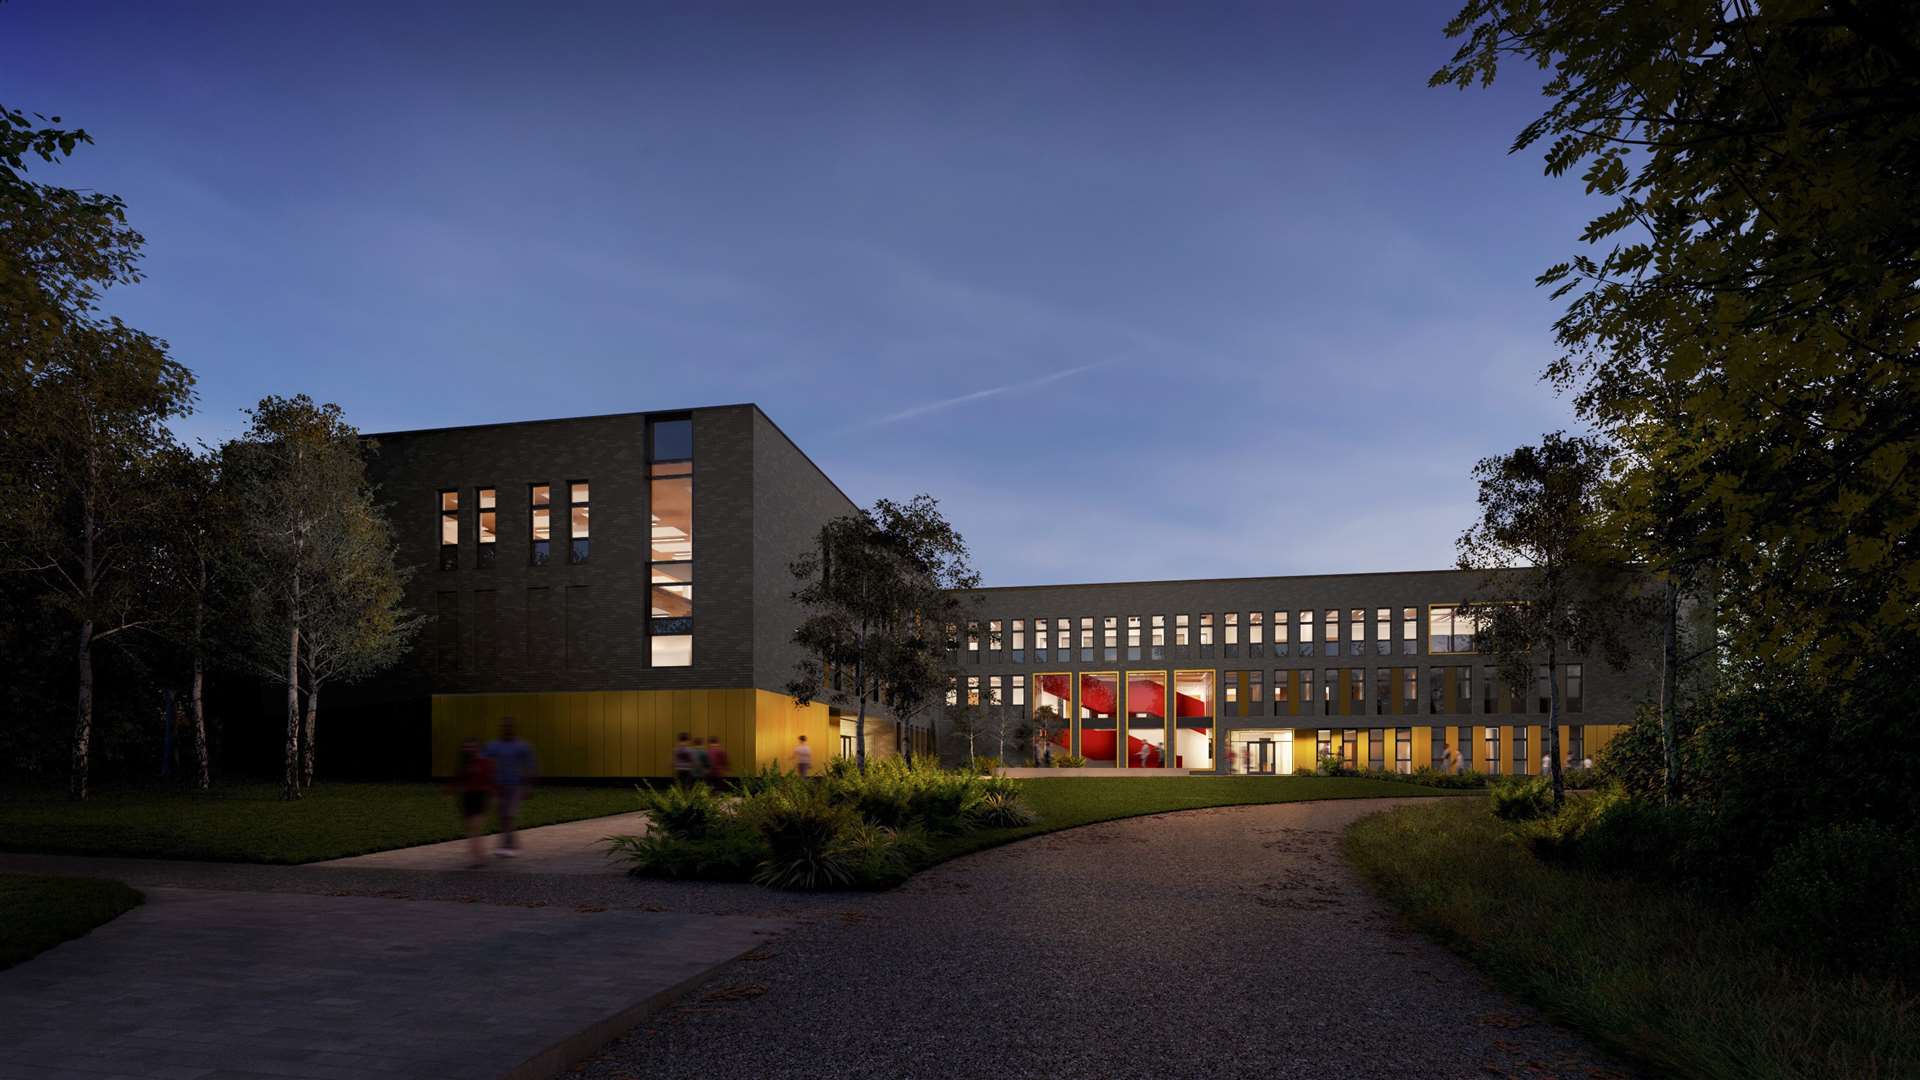 Willmott Dixon has been awarded a £13.4m contract to build a new School of Economics for the University of Kent